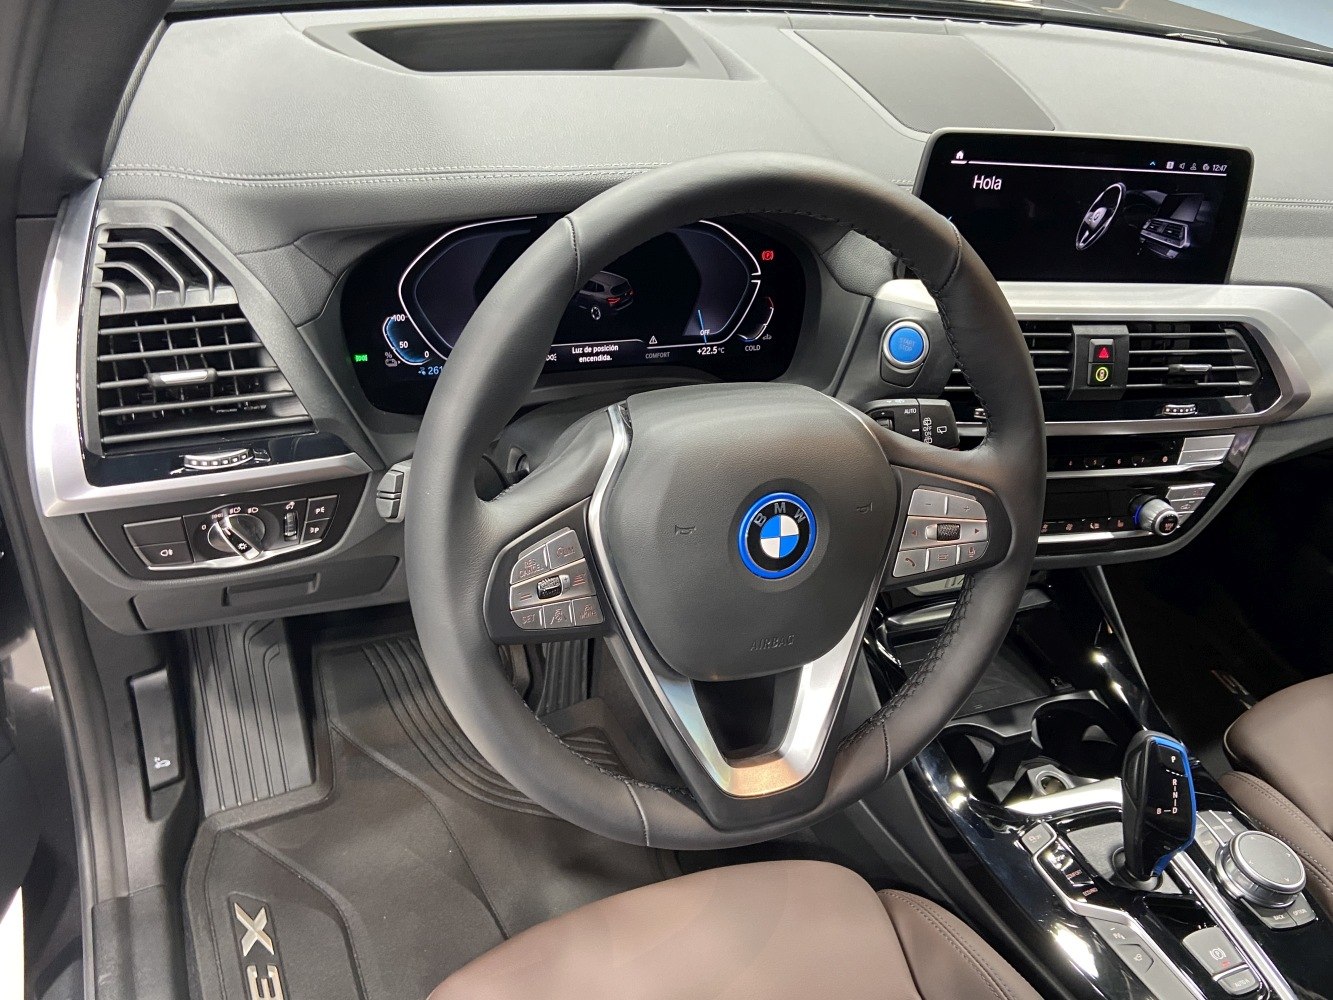 https://totalrenting.es/wp-content/uploads/2022/10/bmw-ix3-g08-2021-80-kwh-286-cv-suv-4.png